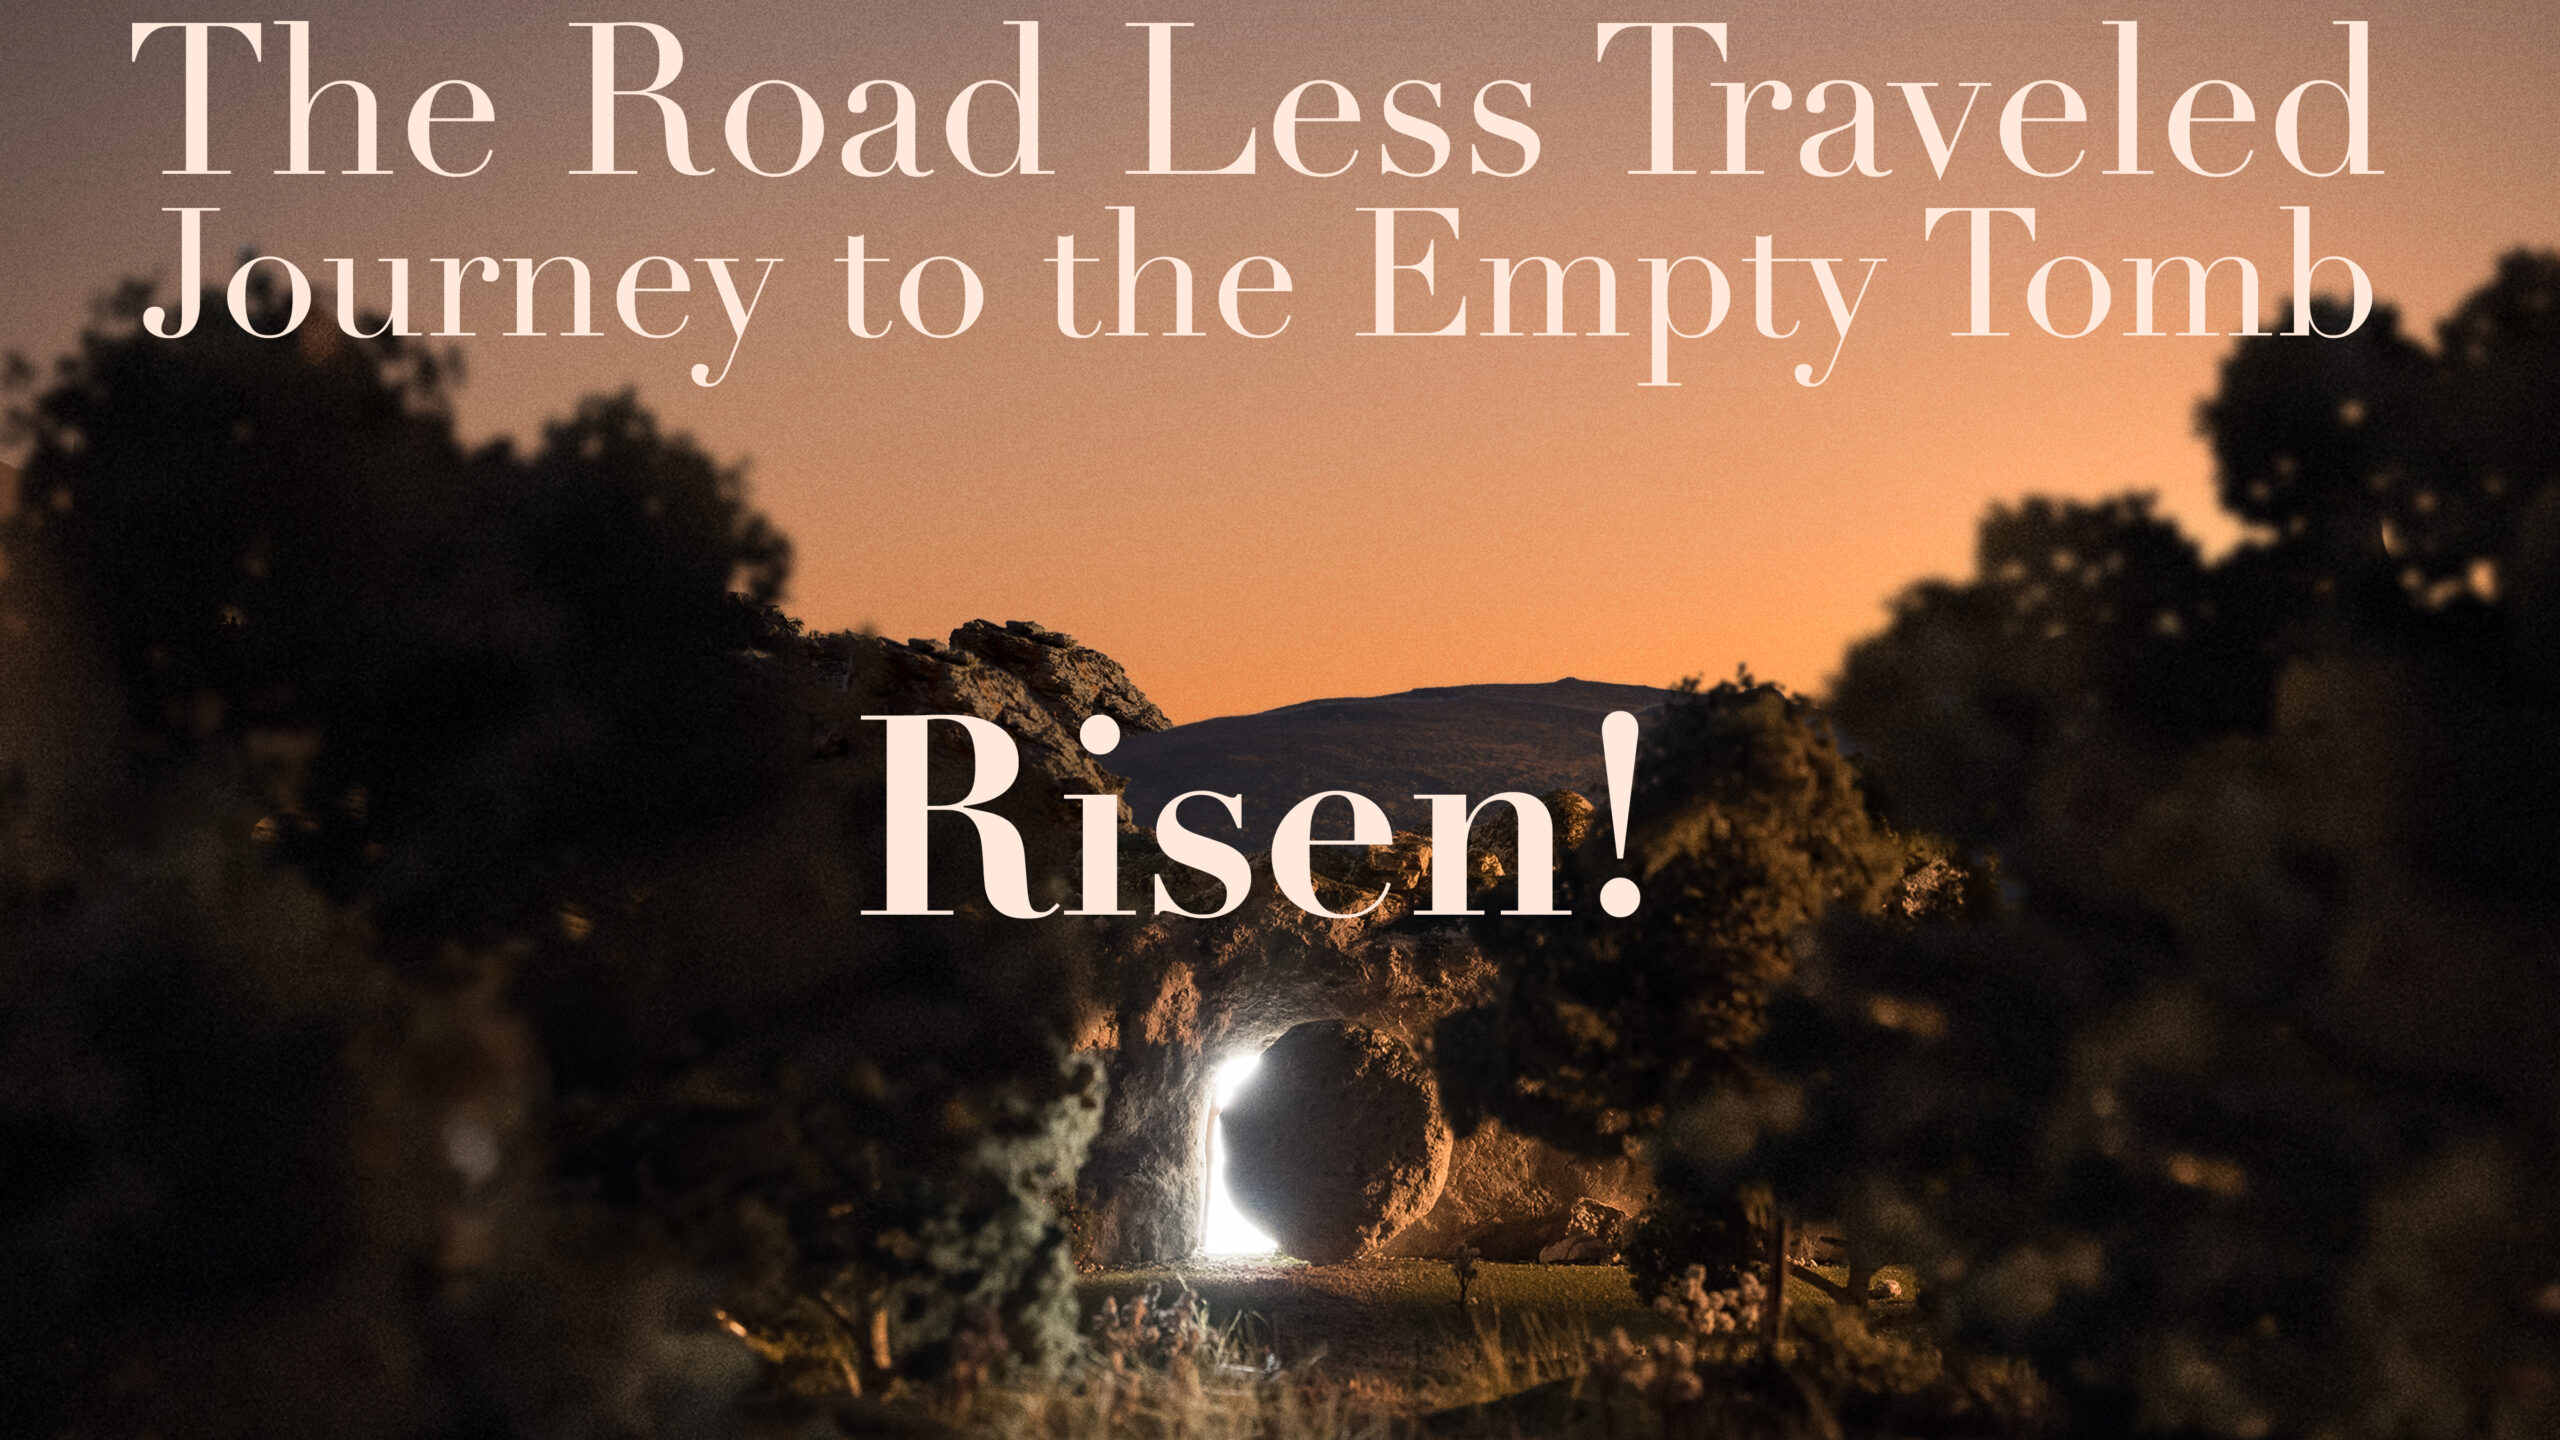 The Road Less Traveled - Journey to the Empty Tomb Part 4 "Risen!" (THRIVE)